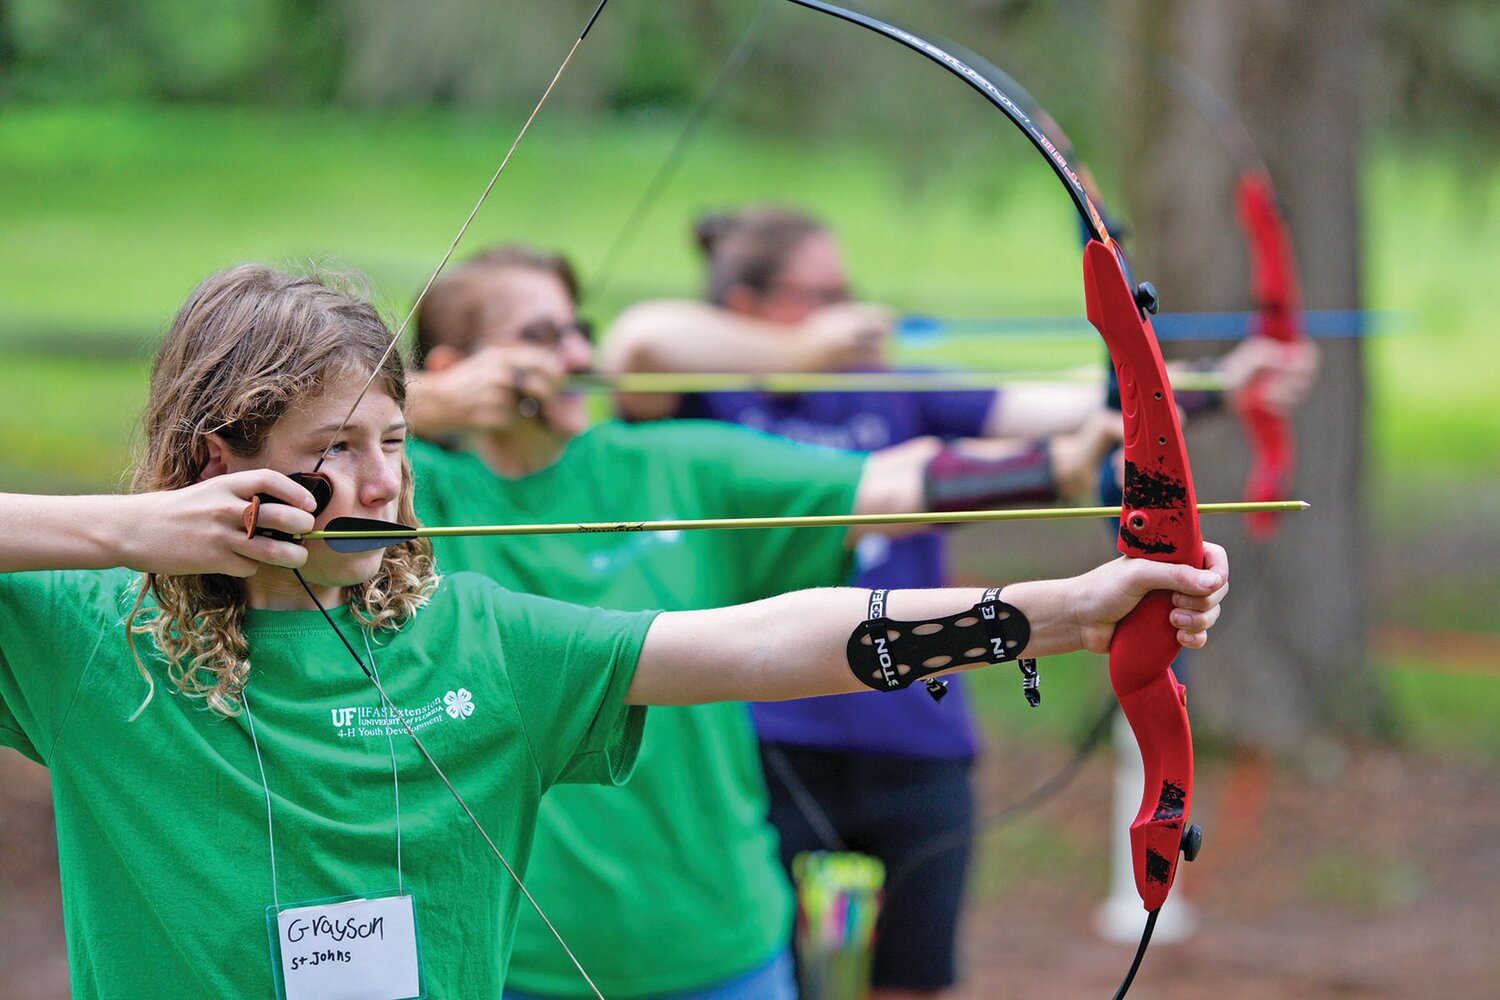 4-H youth participate in archery at 4-H Camp Cherry Lake.